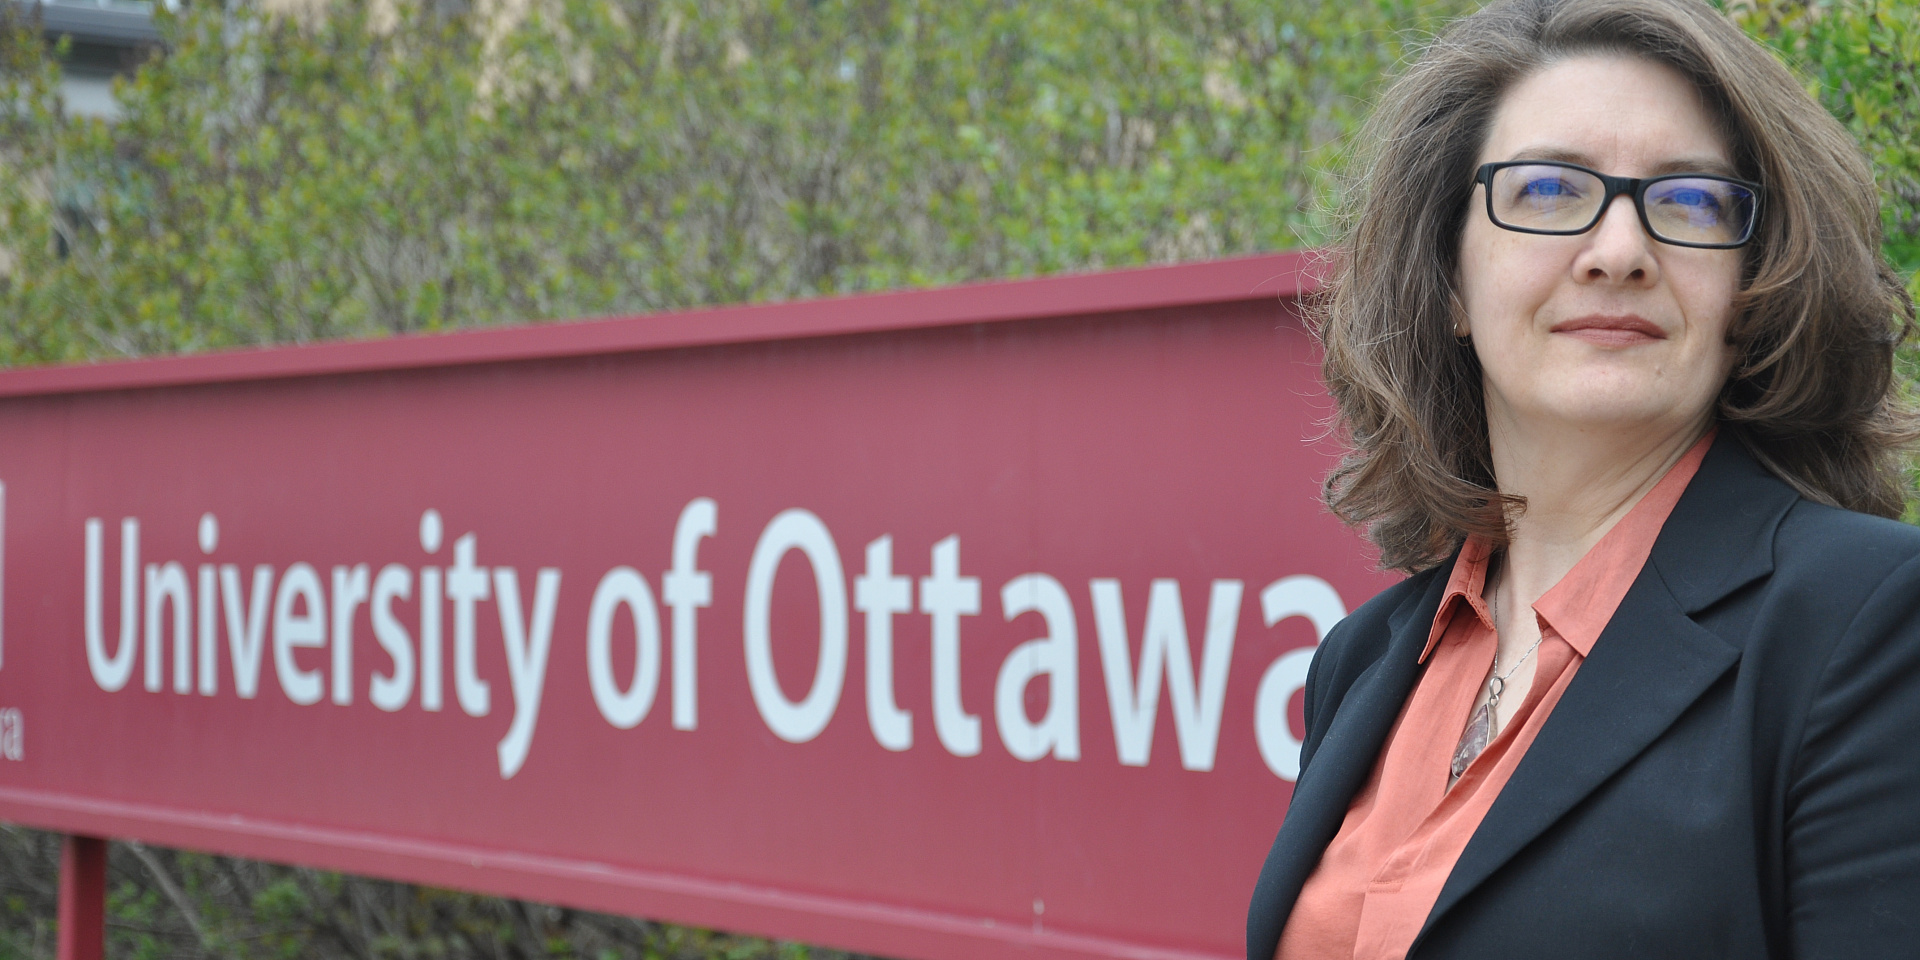 Author in front of University of Ottawa sign